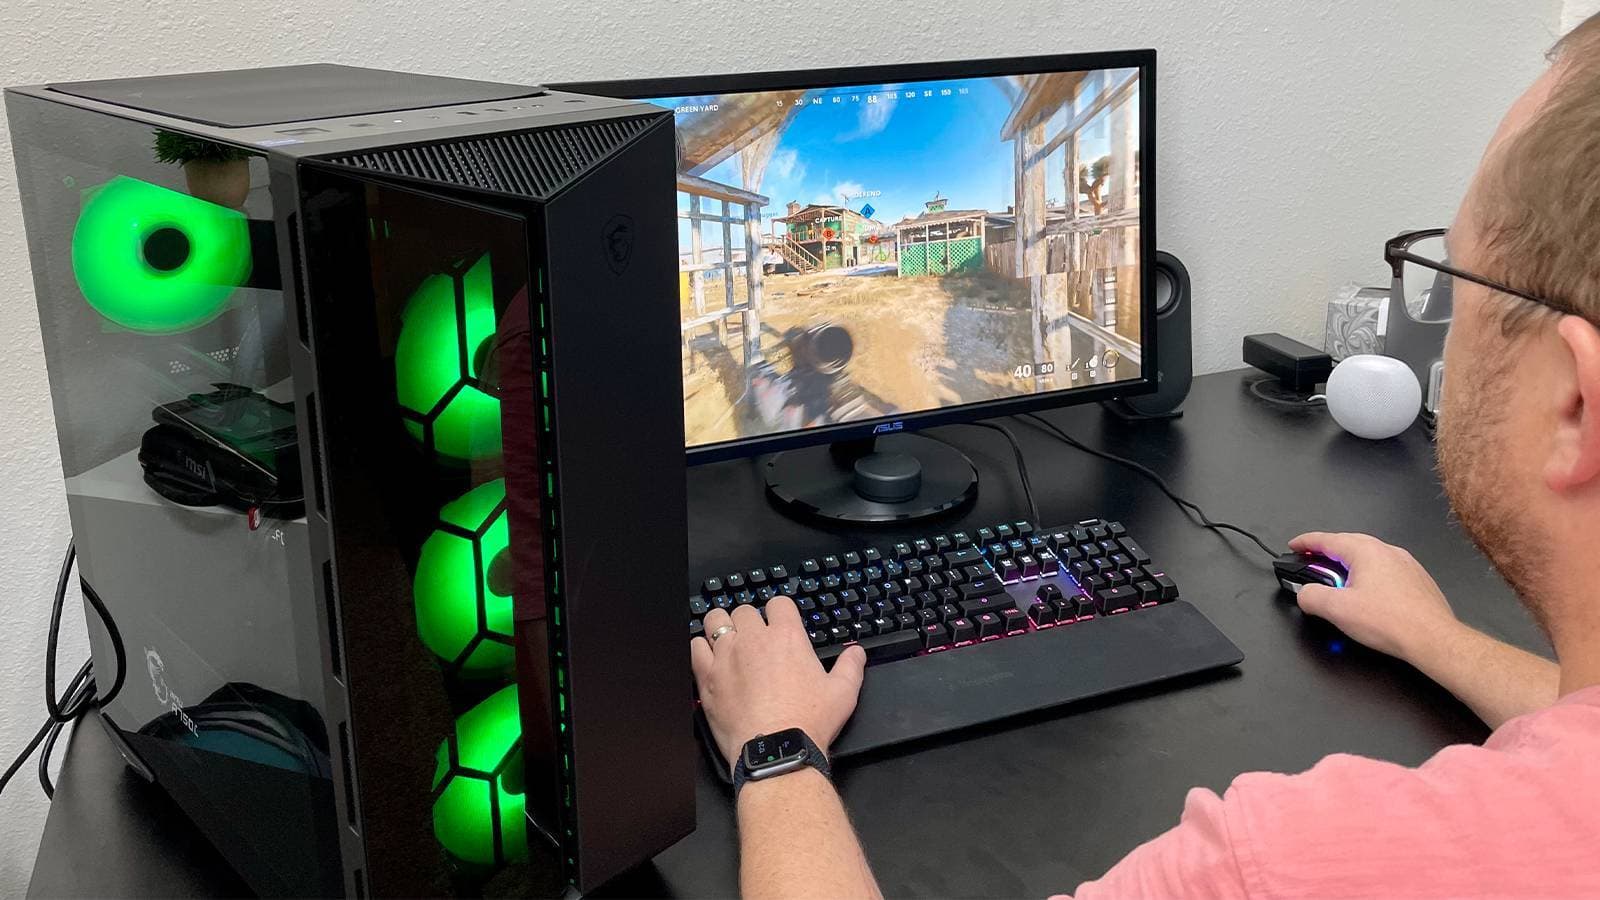 Consider these accessories to complete your dream gaming PC setup